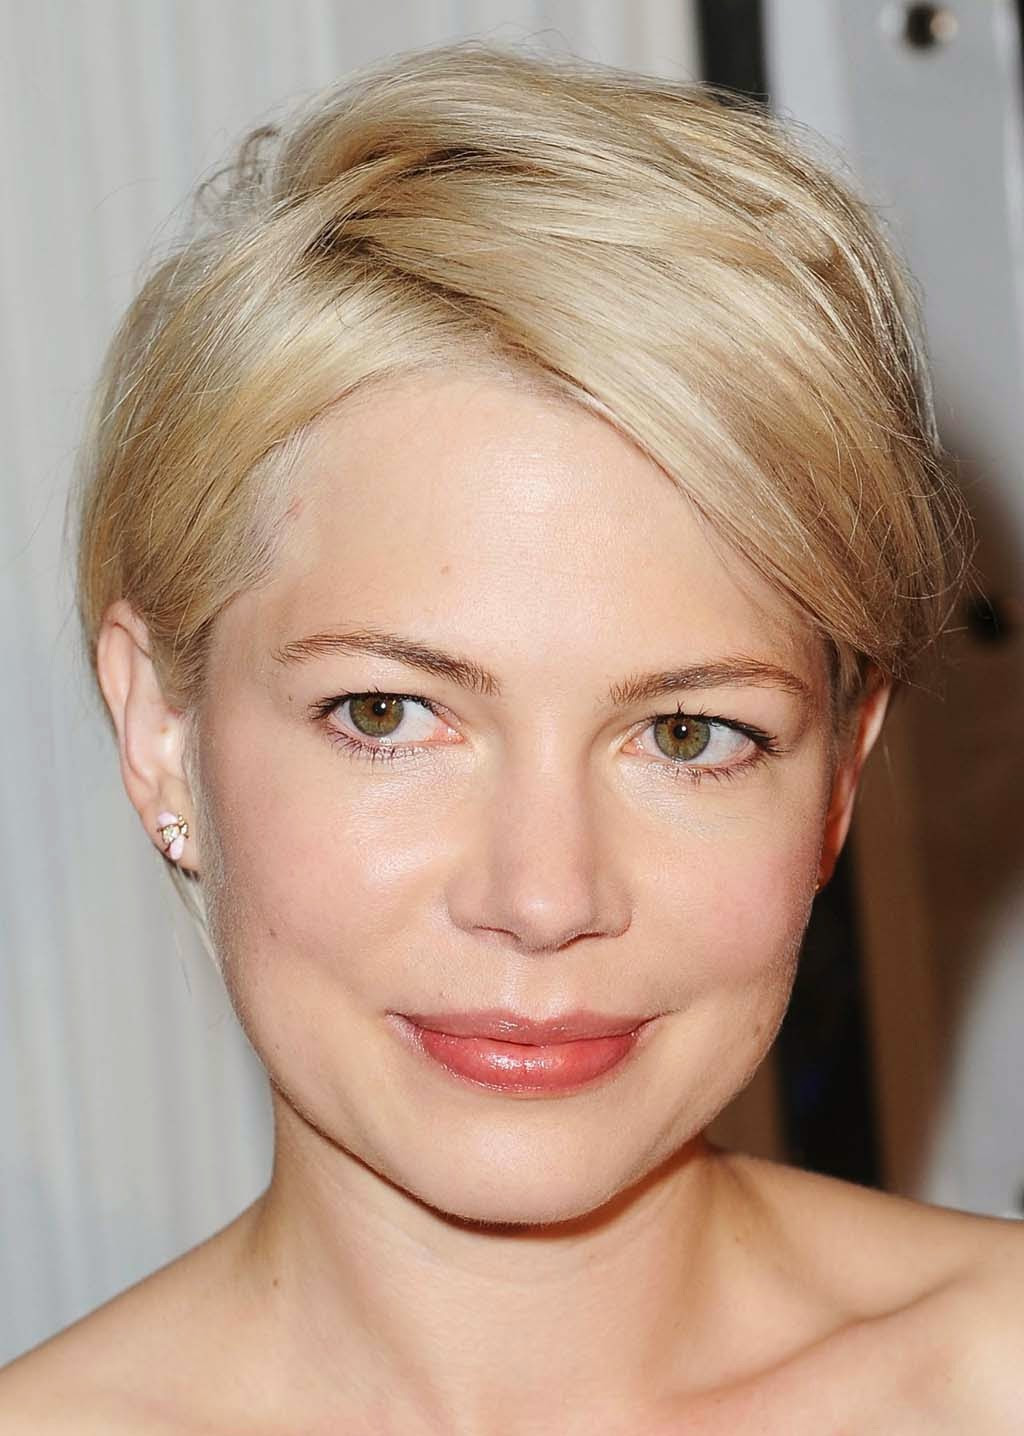 Short Hairstyles Round Face
 Superb Hairstyle Short Cool Hairstyles for Round Faces